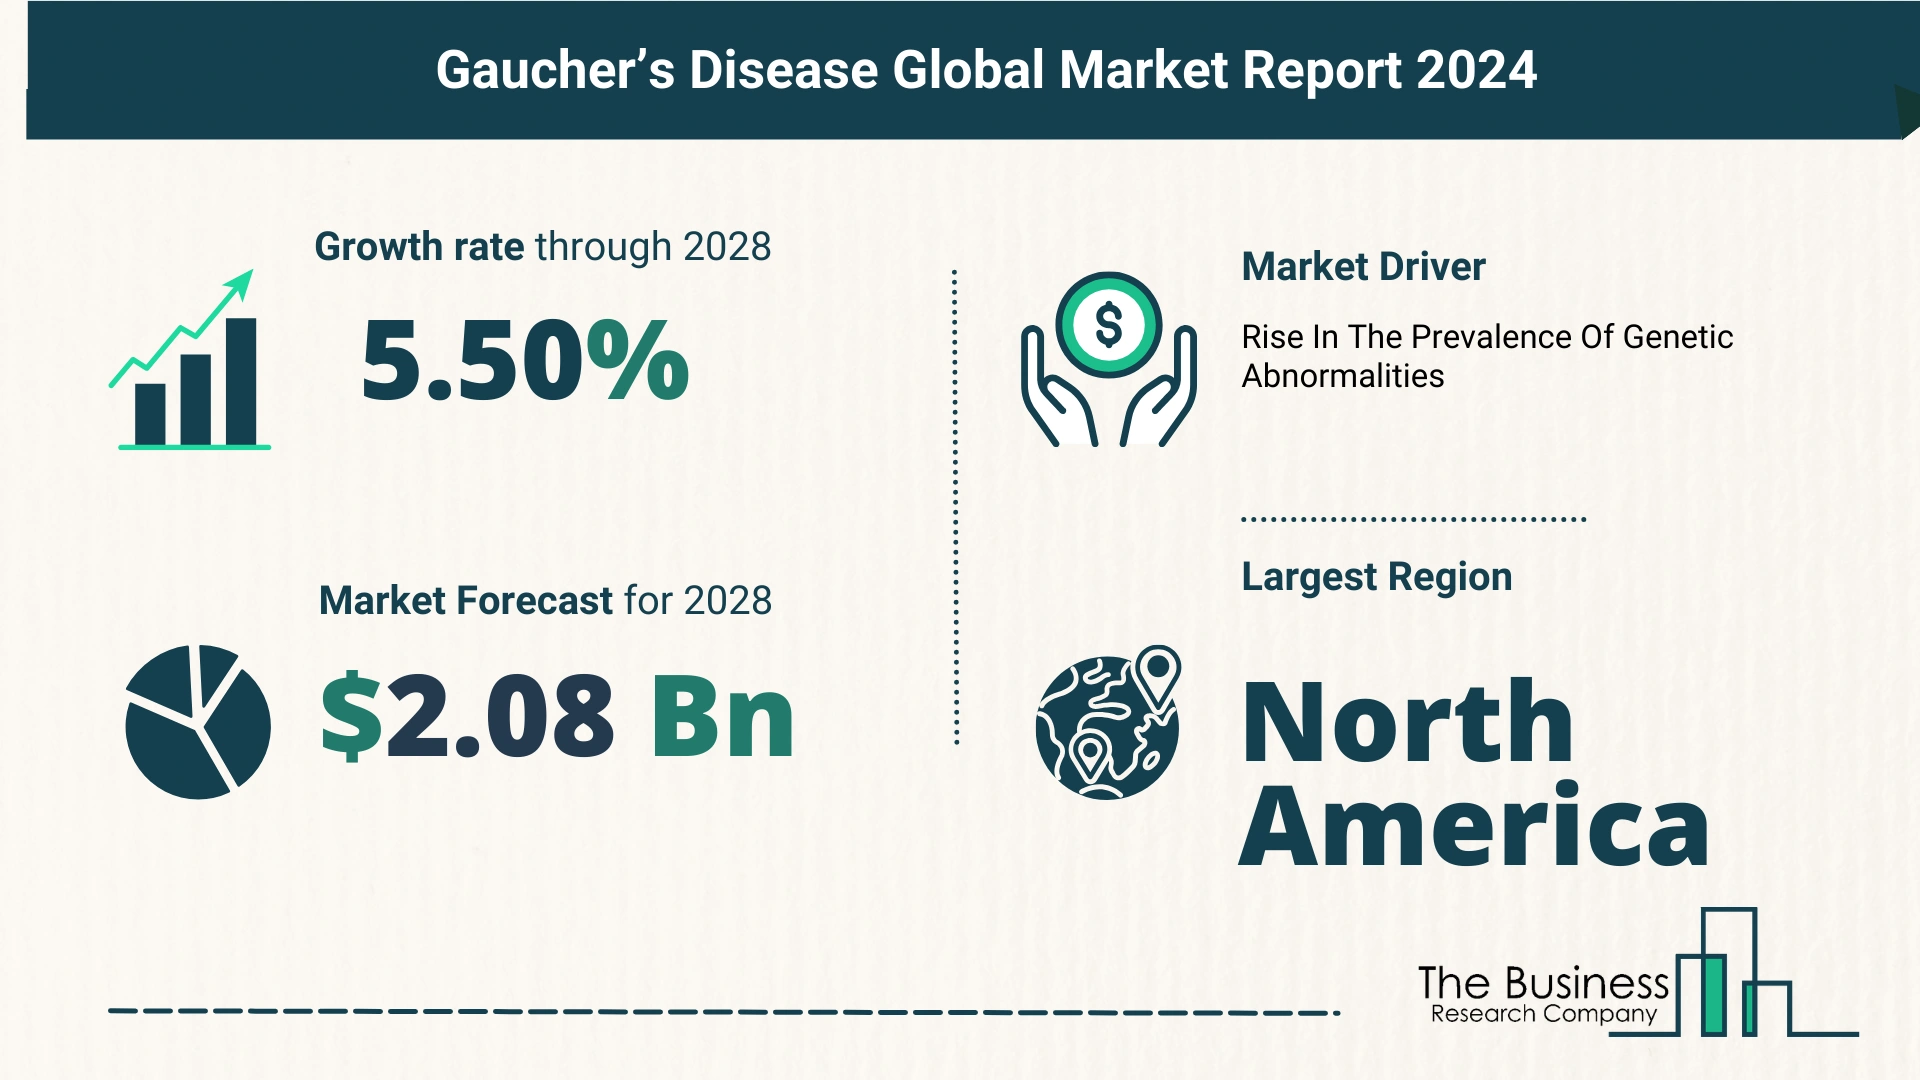 Top 5 Insights From The Gaucher’s Disease Market Report 2024